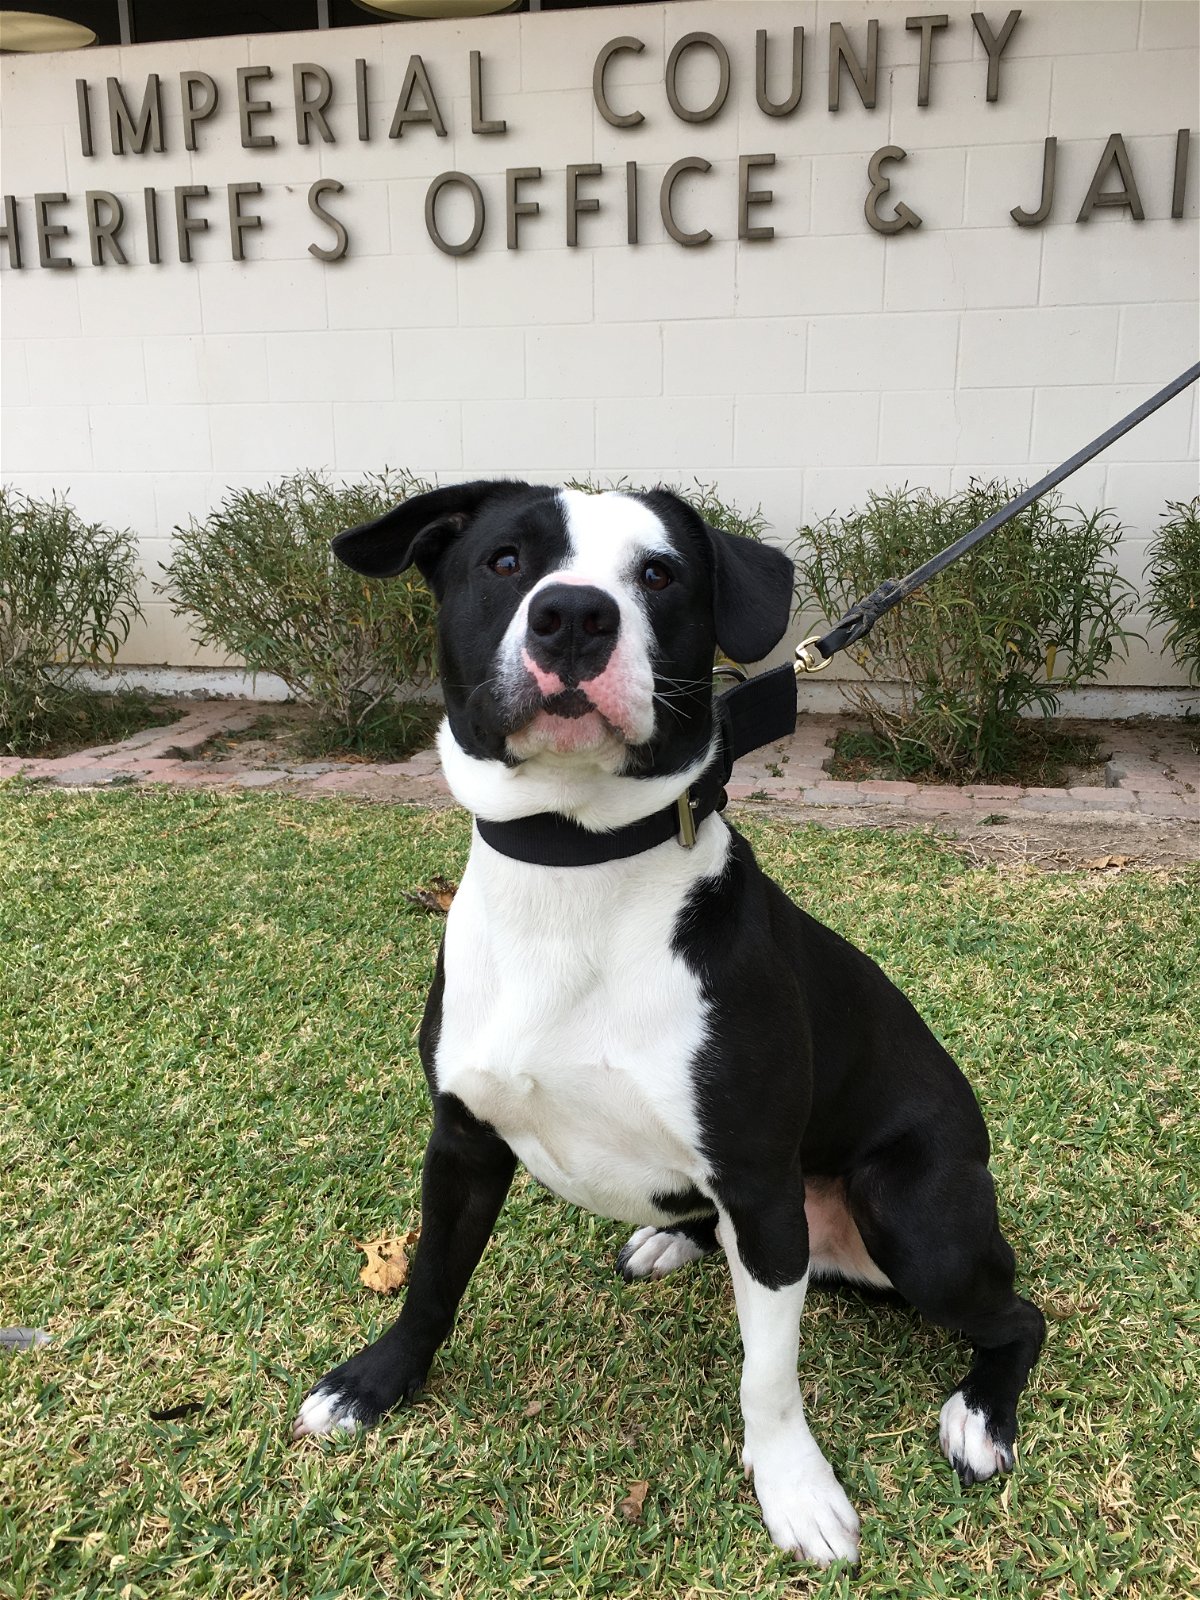 Meet Gauge, a Pit-Bull mix and Imperial Couny sheriff's newest K-9. Courtesy: ICSO